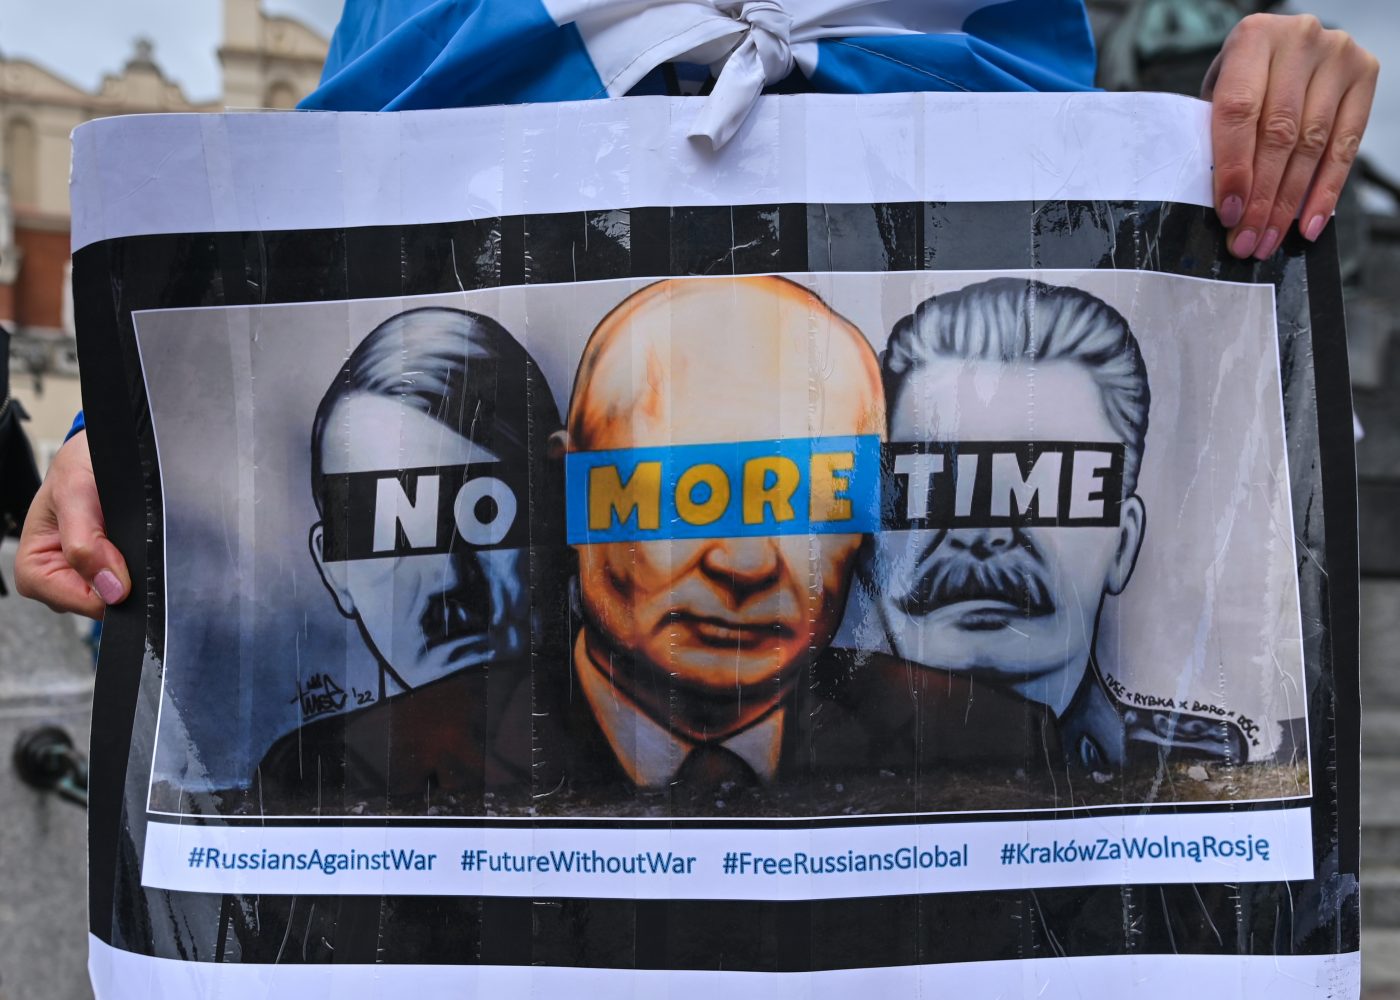 Photo: Members of the local Russian diaspora in Krakow are seen during a silent anti-war demonstration and protest against Vladimir Putin and the war with Ukraine at the Adam Mickiewicz Monument in Krakow's Main Square. On Sunday, October 02, 2022, in Krakow, Poland. Credit: Artur Widak/NurPhoto